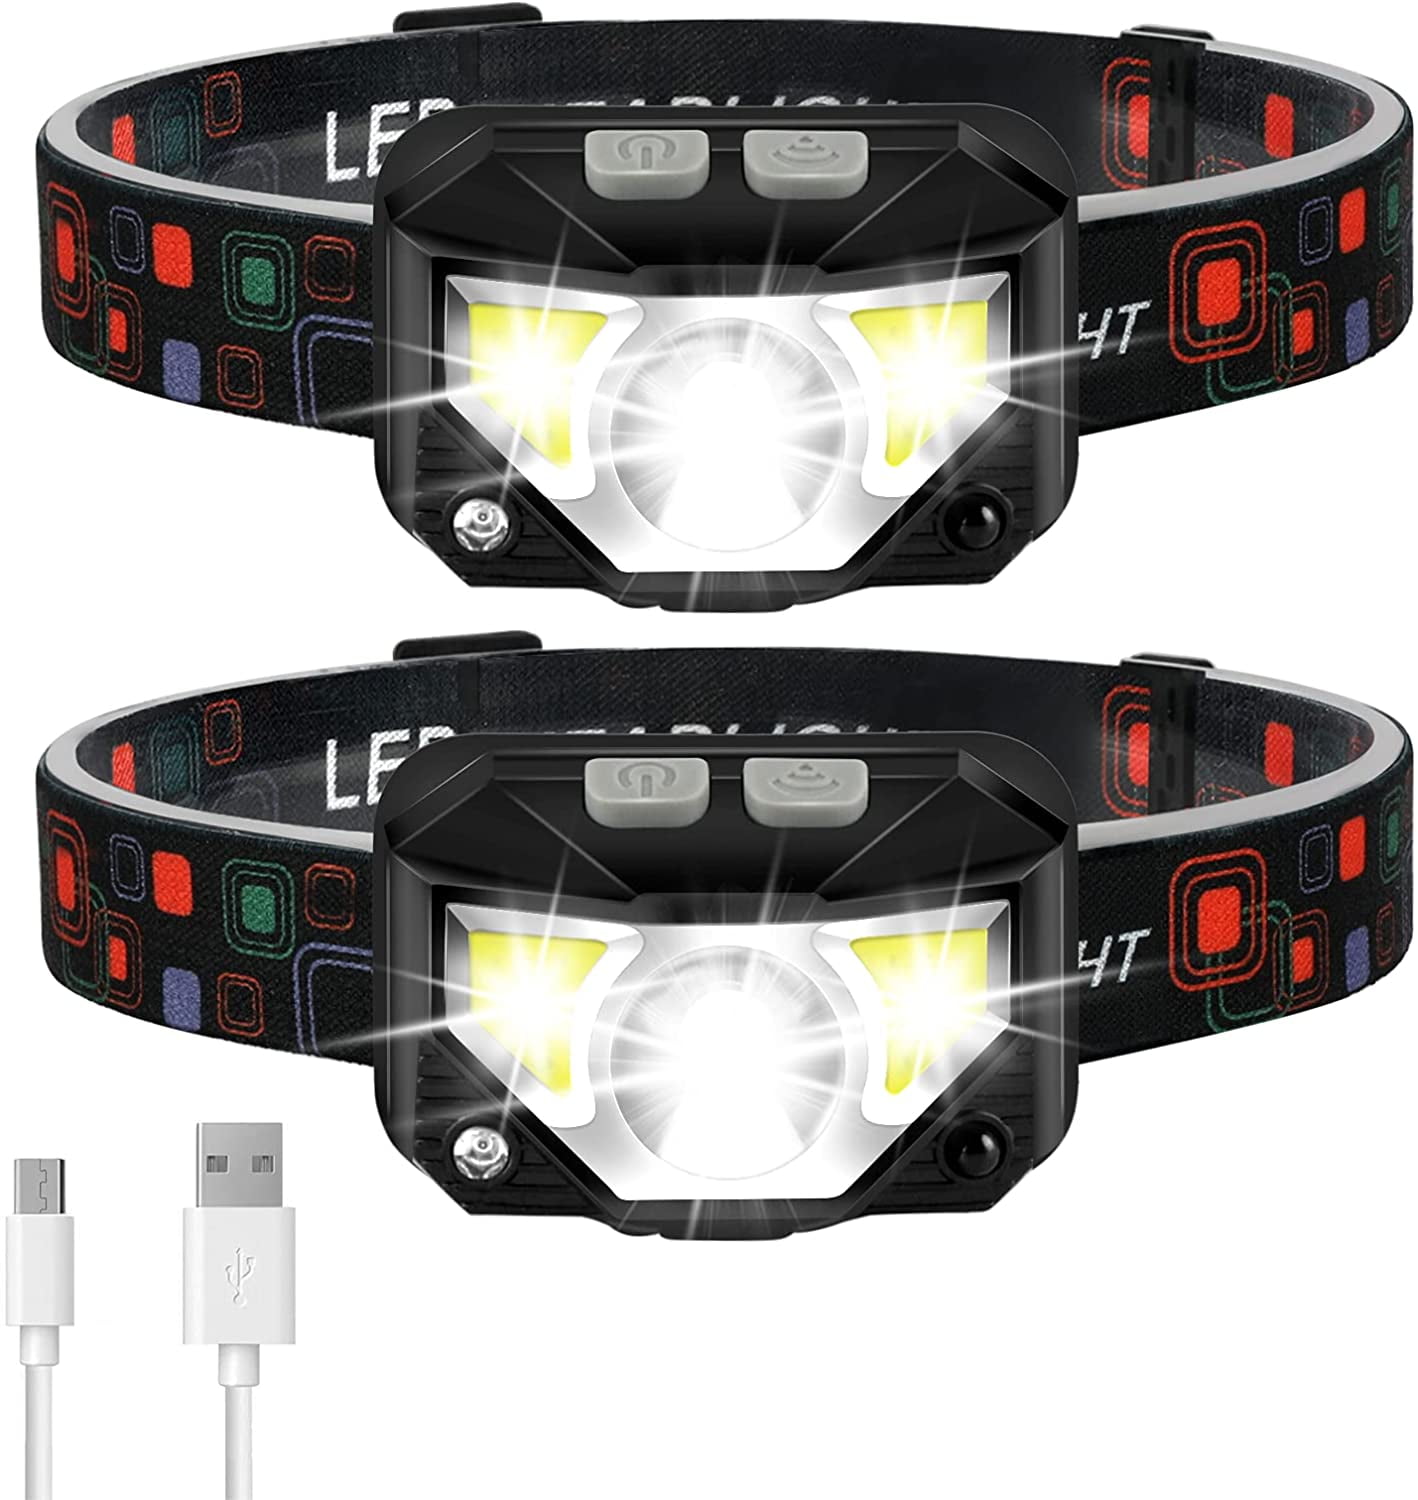 Headlamp Flashlight,1100 Lumen Ultra-Light Bright LED Rechargeable Headlight  with White Red Light, 2-PACK Waterproof Motion Sensor Head Lamp, Modes  for Outdoor Camping Running Cycling Fishing